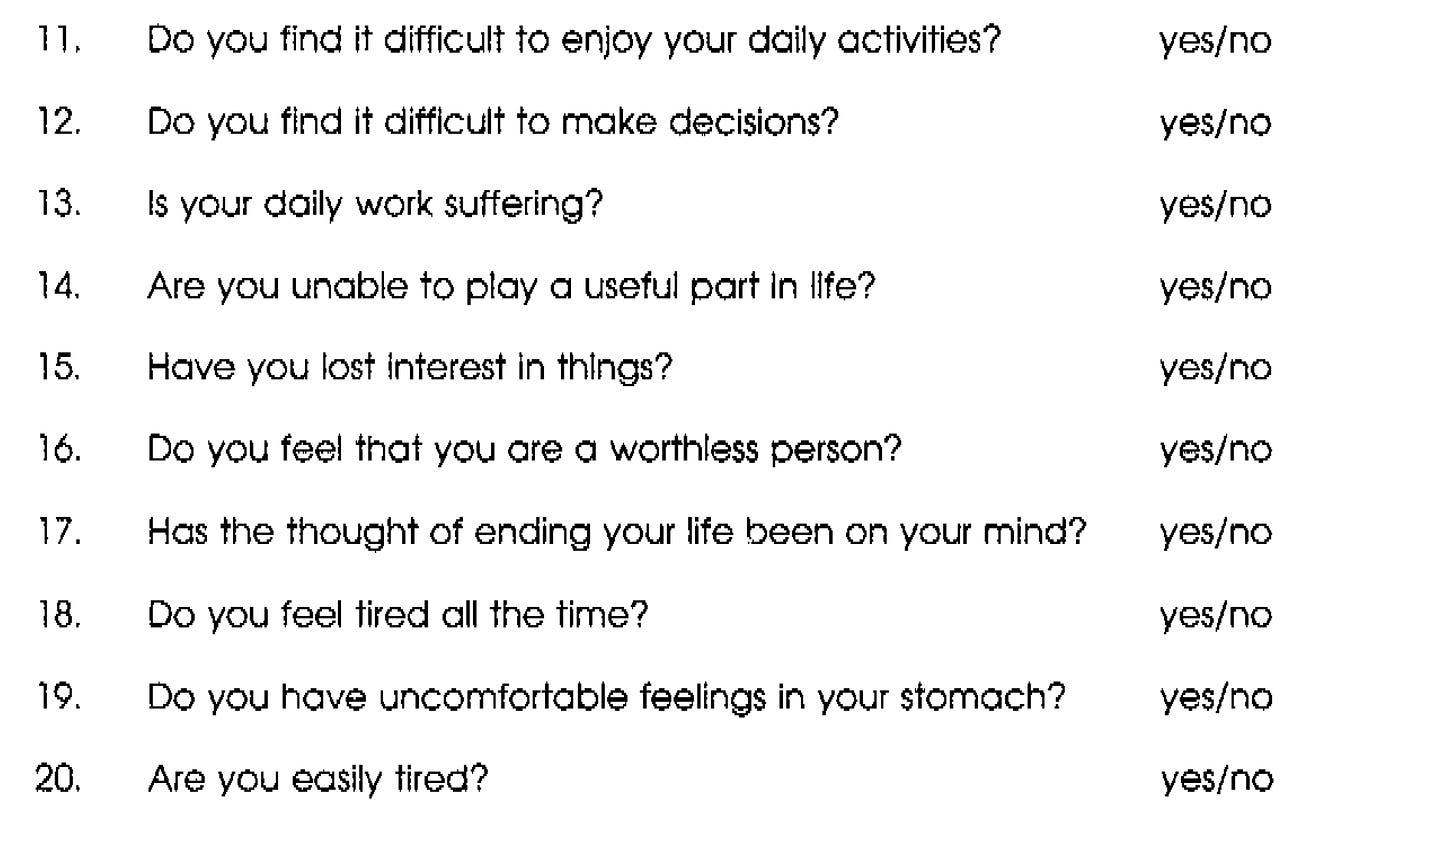 A list of questions from a WHO survey administered by doctors. The questions are all yes/no and they include: Have you lost interest in things? Do you feel tired all the time? Are you easily tired?